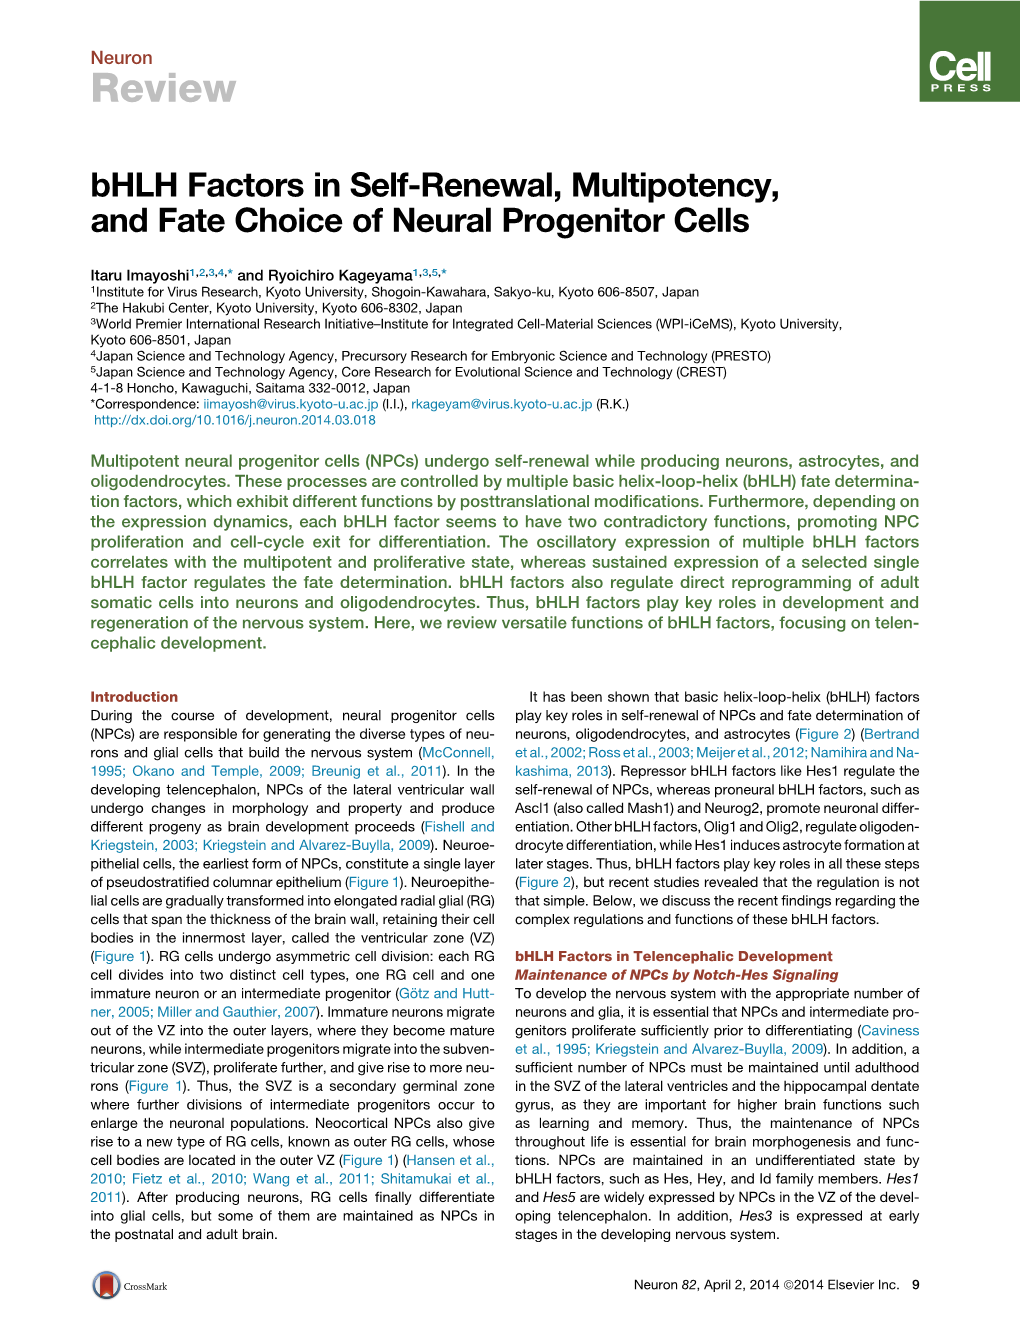 Bhlh Factors in Self-Renewal, Multipotency, and Fate Choice Of